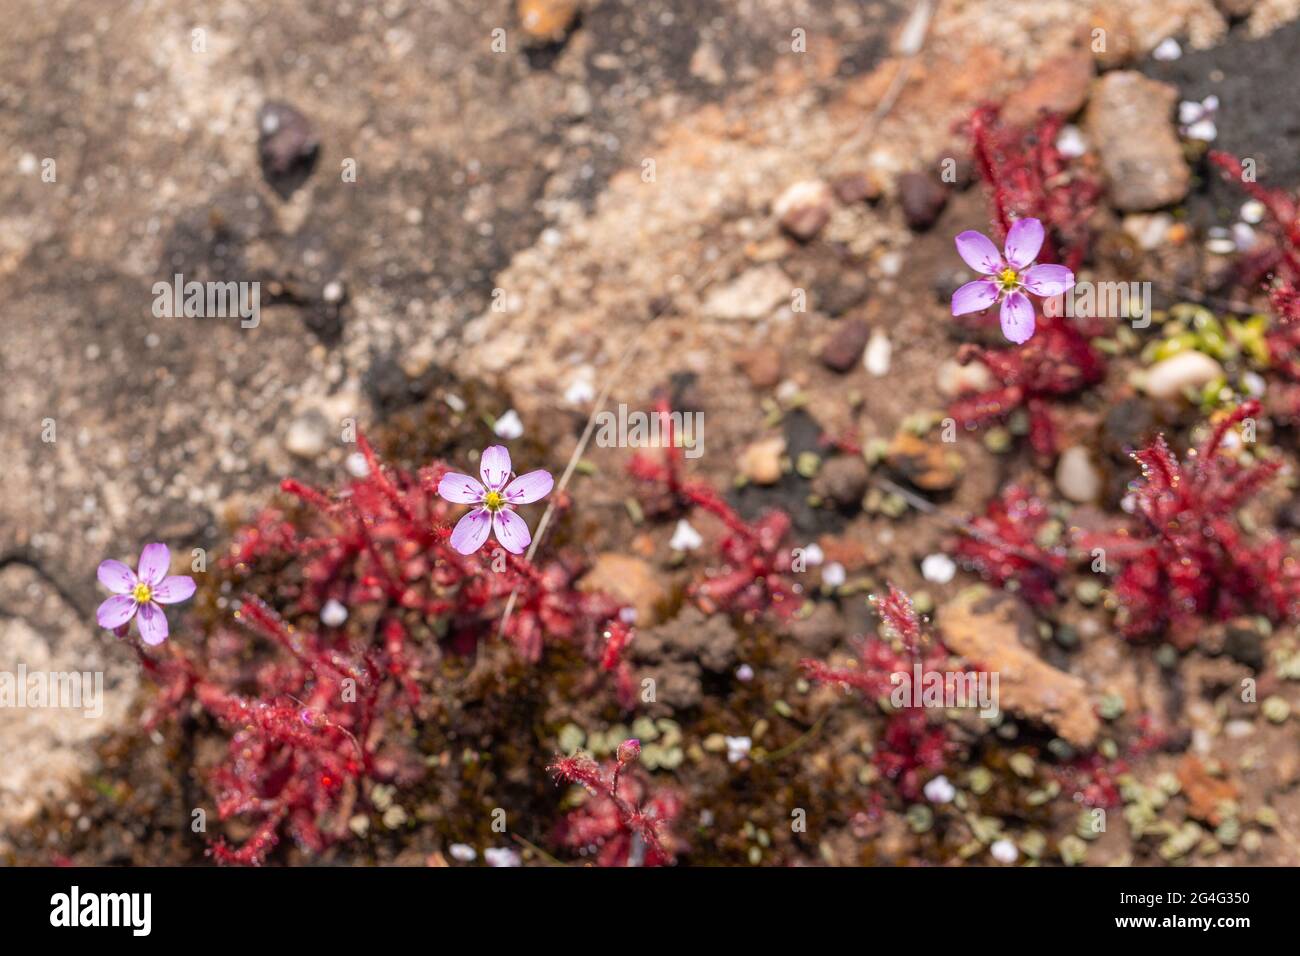 Three pink flowers of Drosera alba near VanRhynsdorp in the Western Cape of South Africa Stock Photo